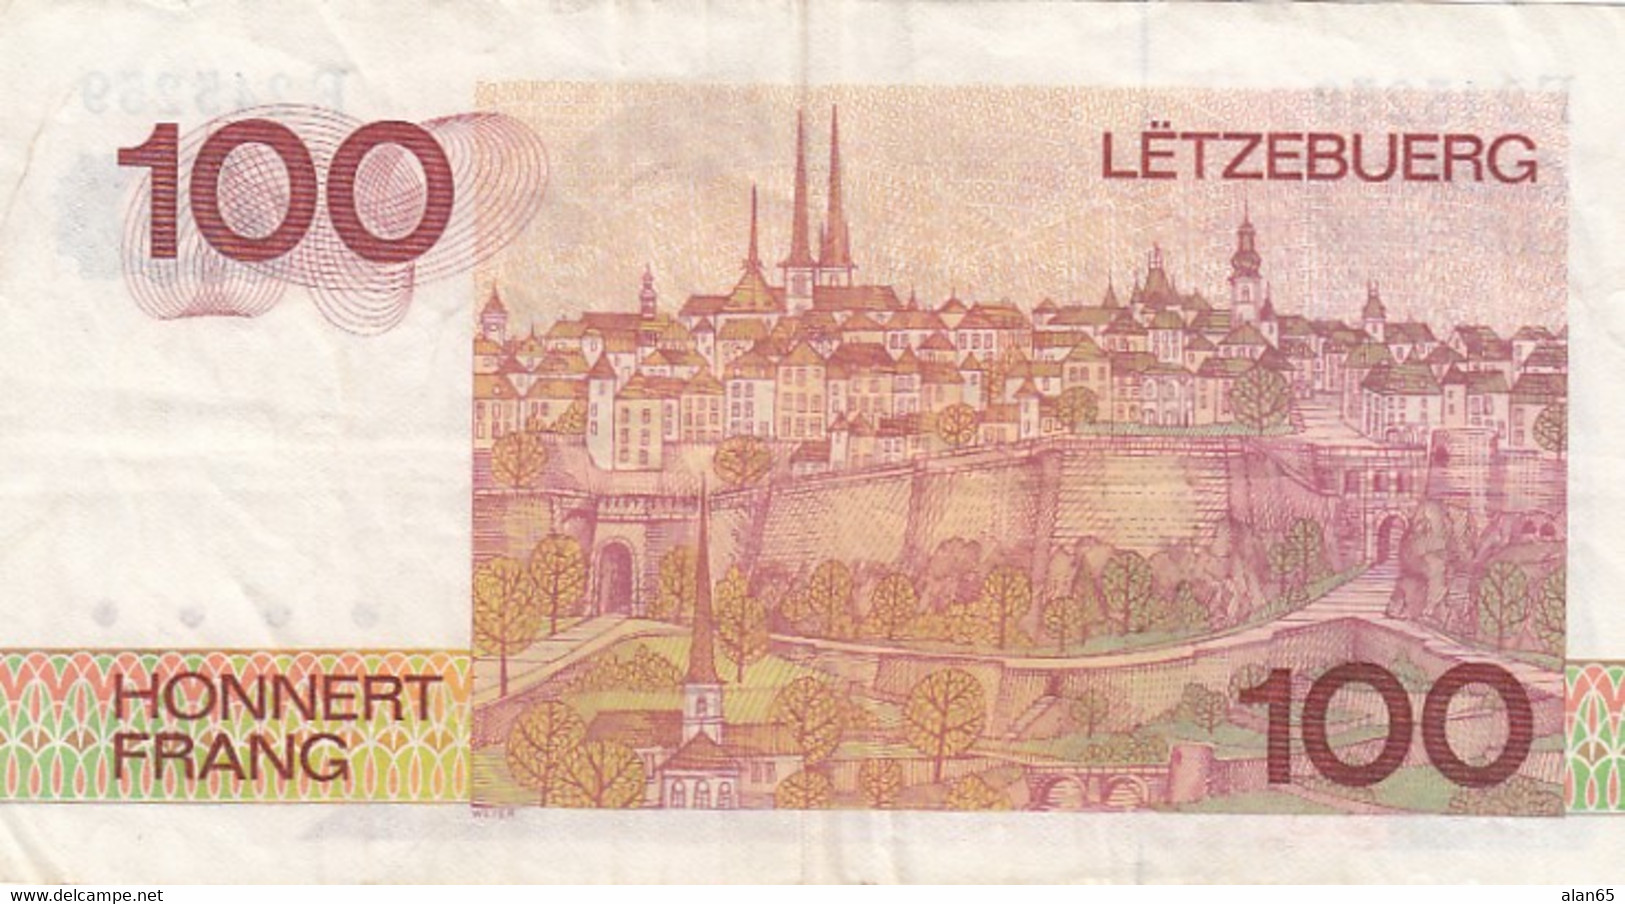 Luxembourg #69b, 100 Francs, 1980 Banknote - Luxembourg